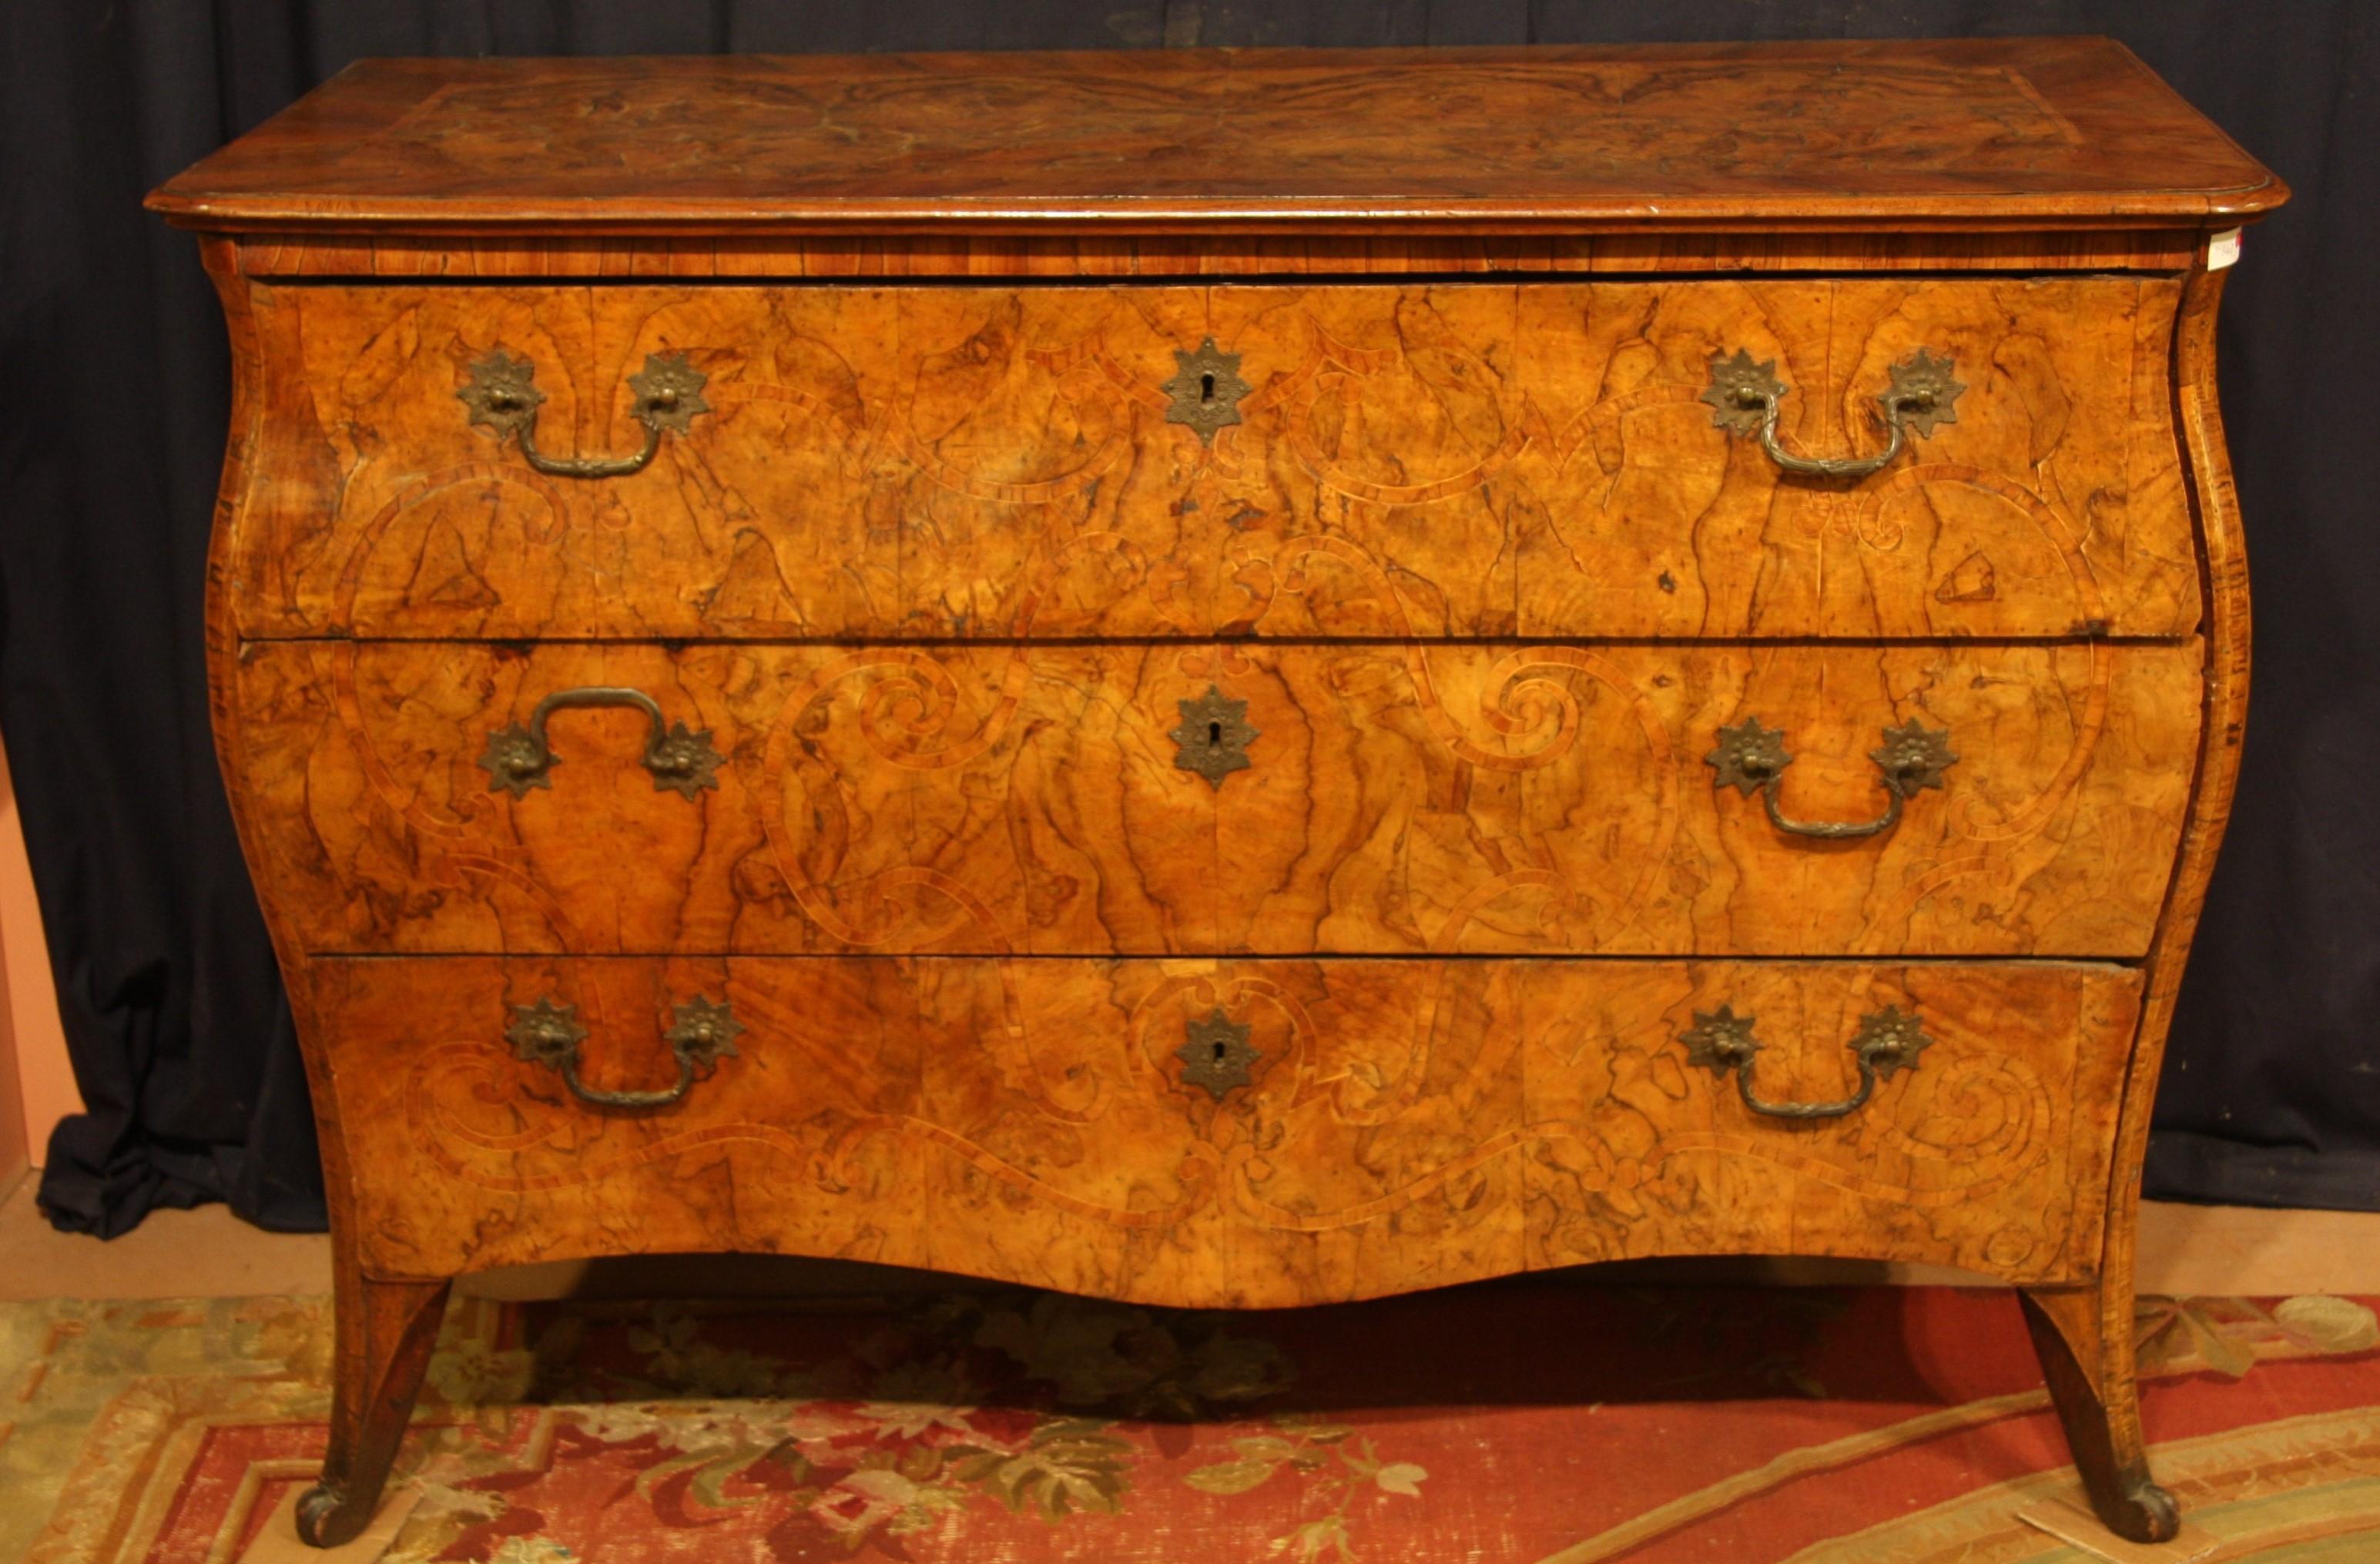 Pair of Italian (Venetian) Louis XV dressers.

Important pair of Lombardy Venetian dressers from the Louis XV period (mid-1700s).
Of wavy, rounded shape on front and sides, entirely walnut-root veneer with elegant  threading in different essences